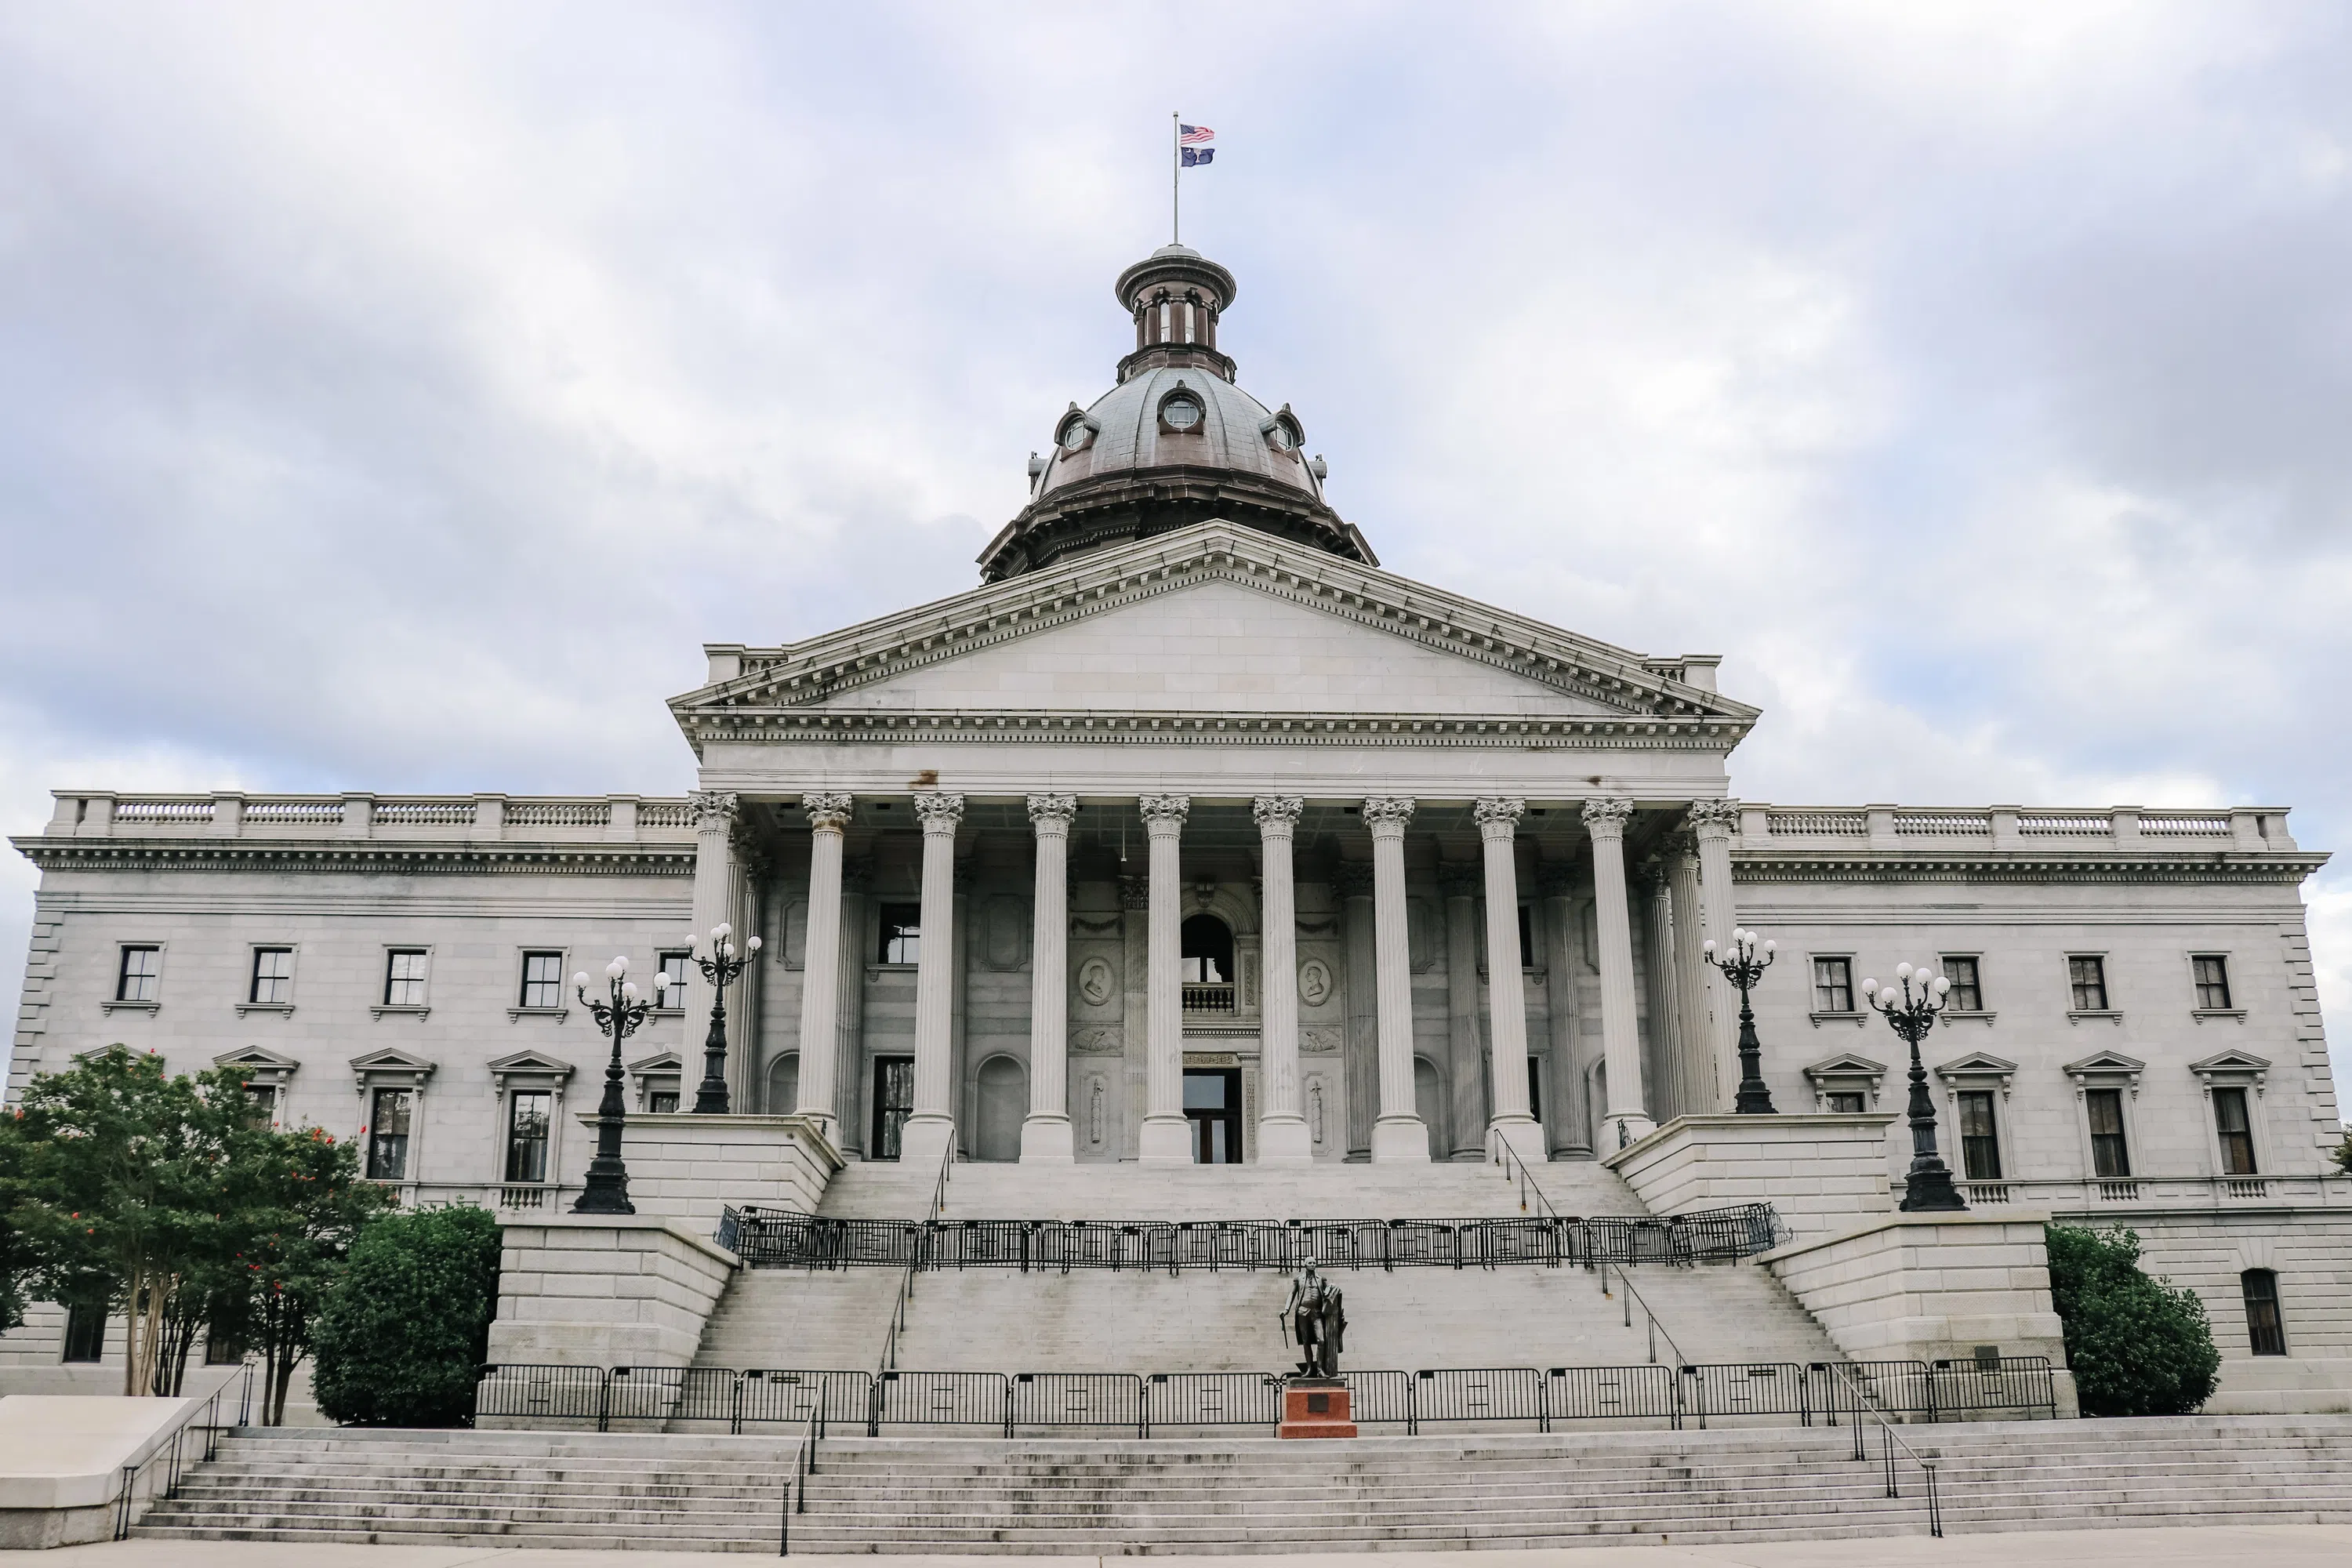 View of the front of the South Carolina State House during the day